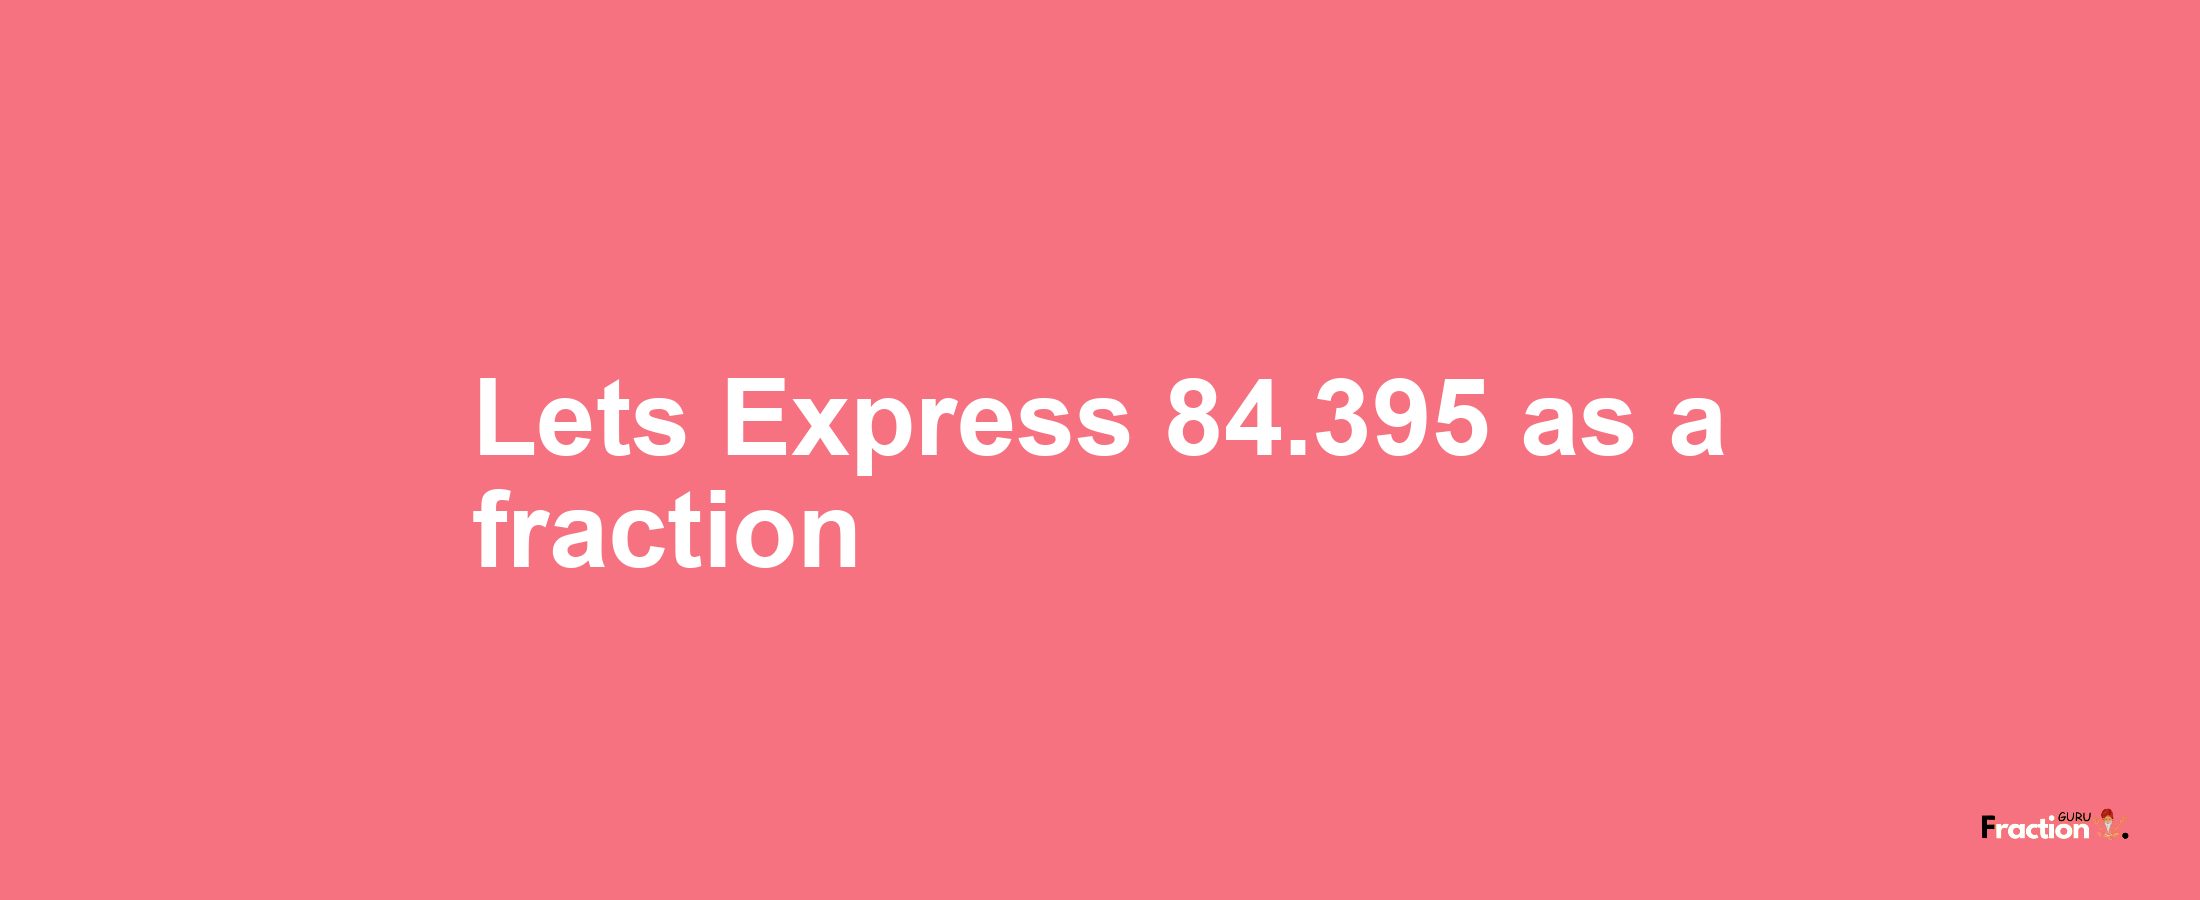 Lets Express 84.395 as afraction